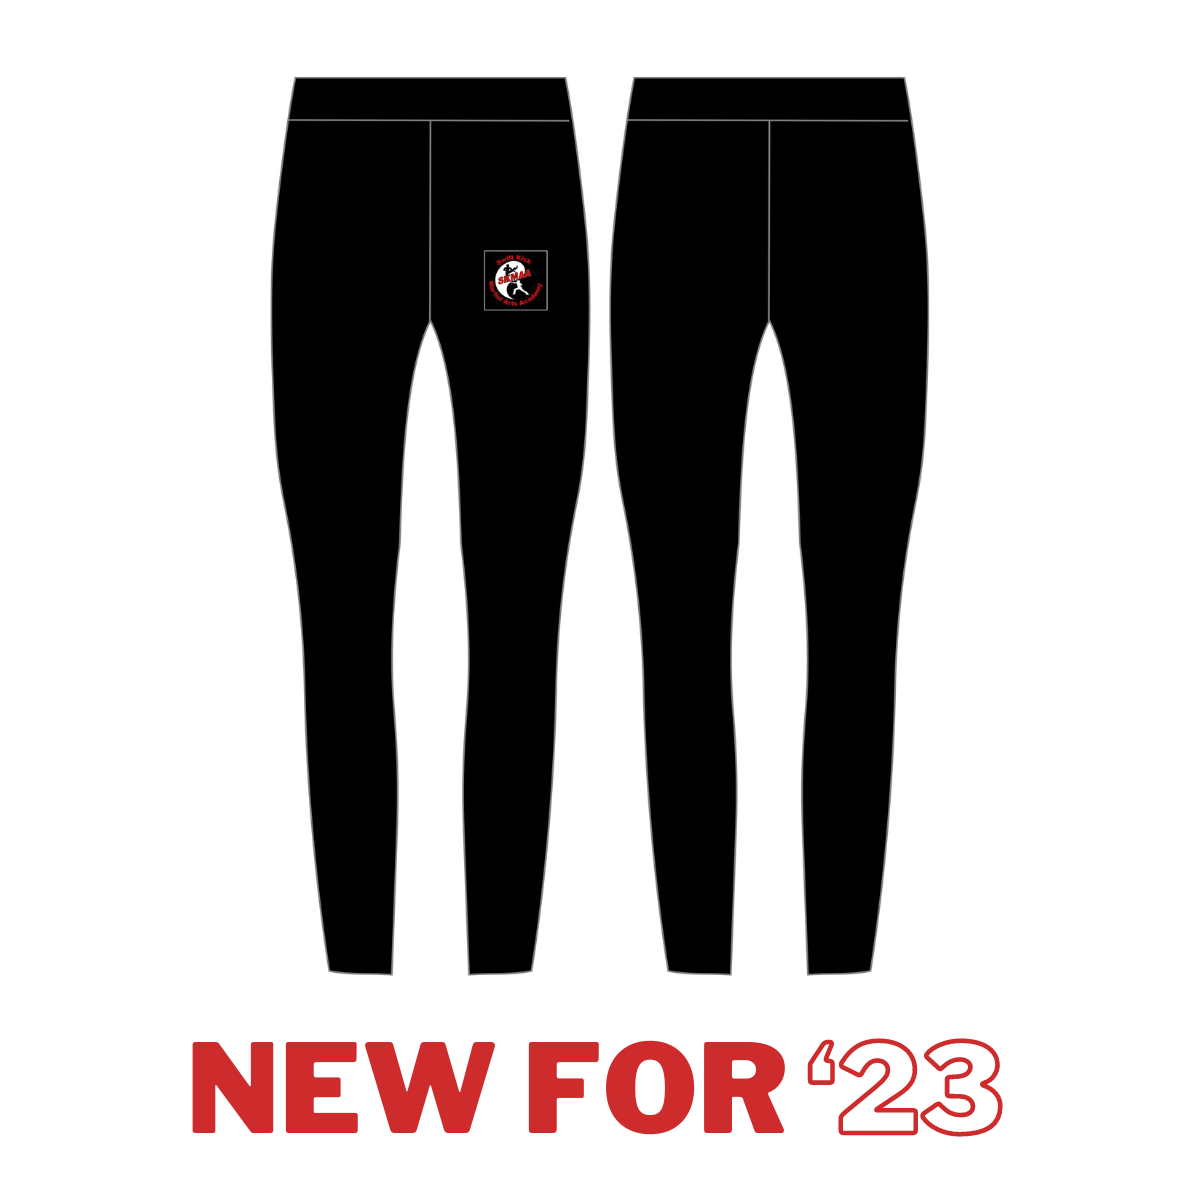 NEW for '23 Swift Kick Martial Arts Academy Leggings Adults